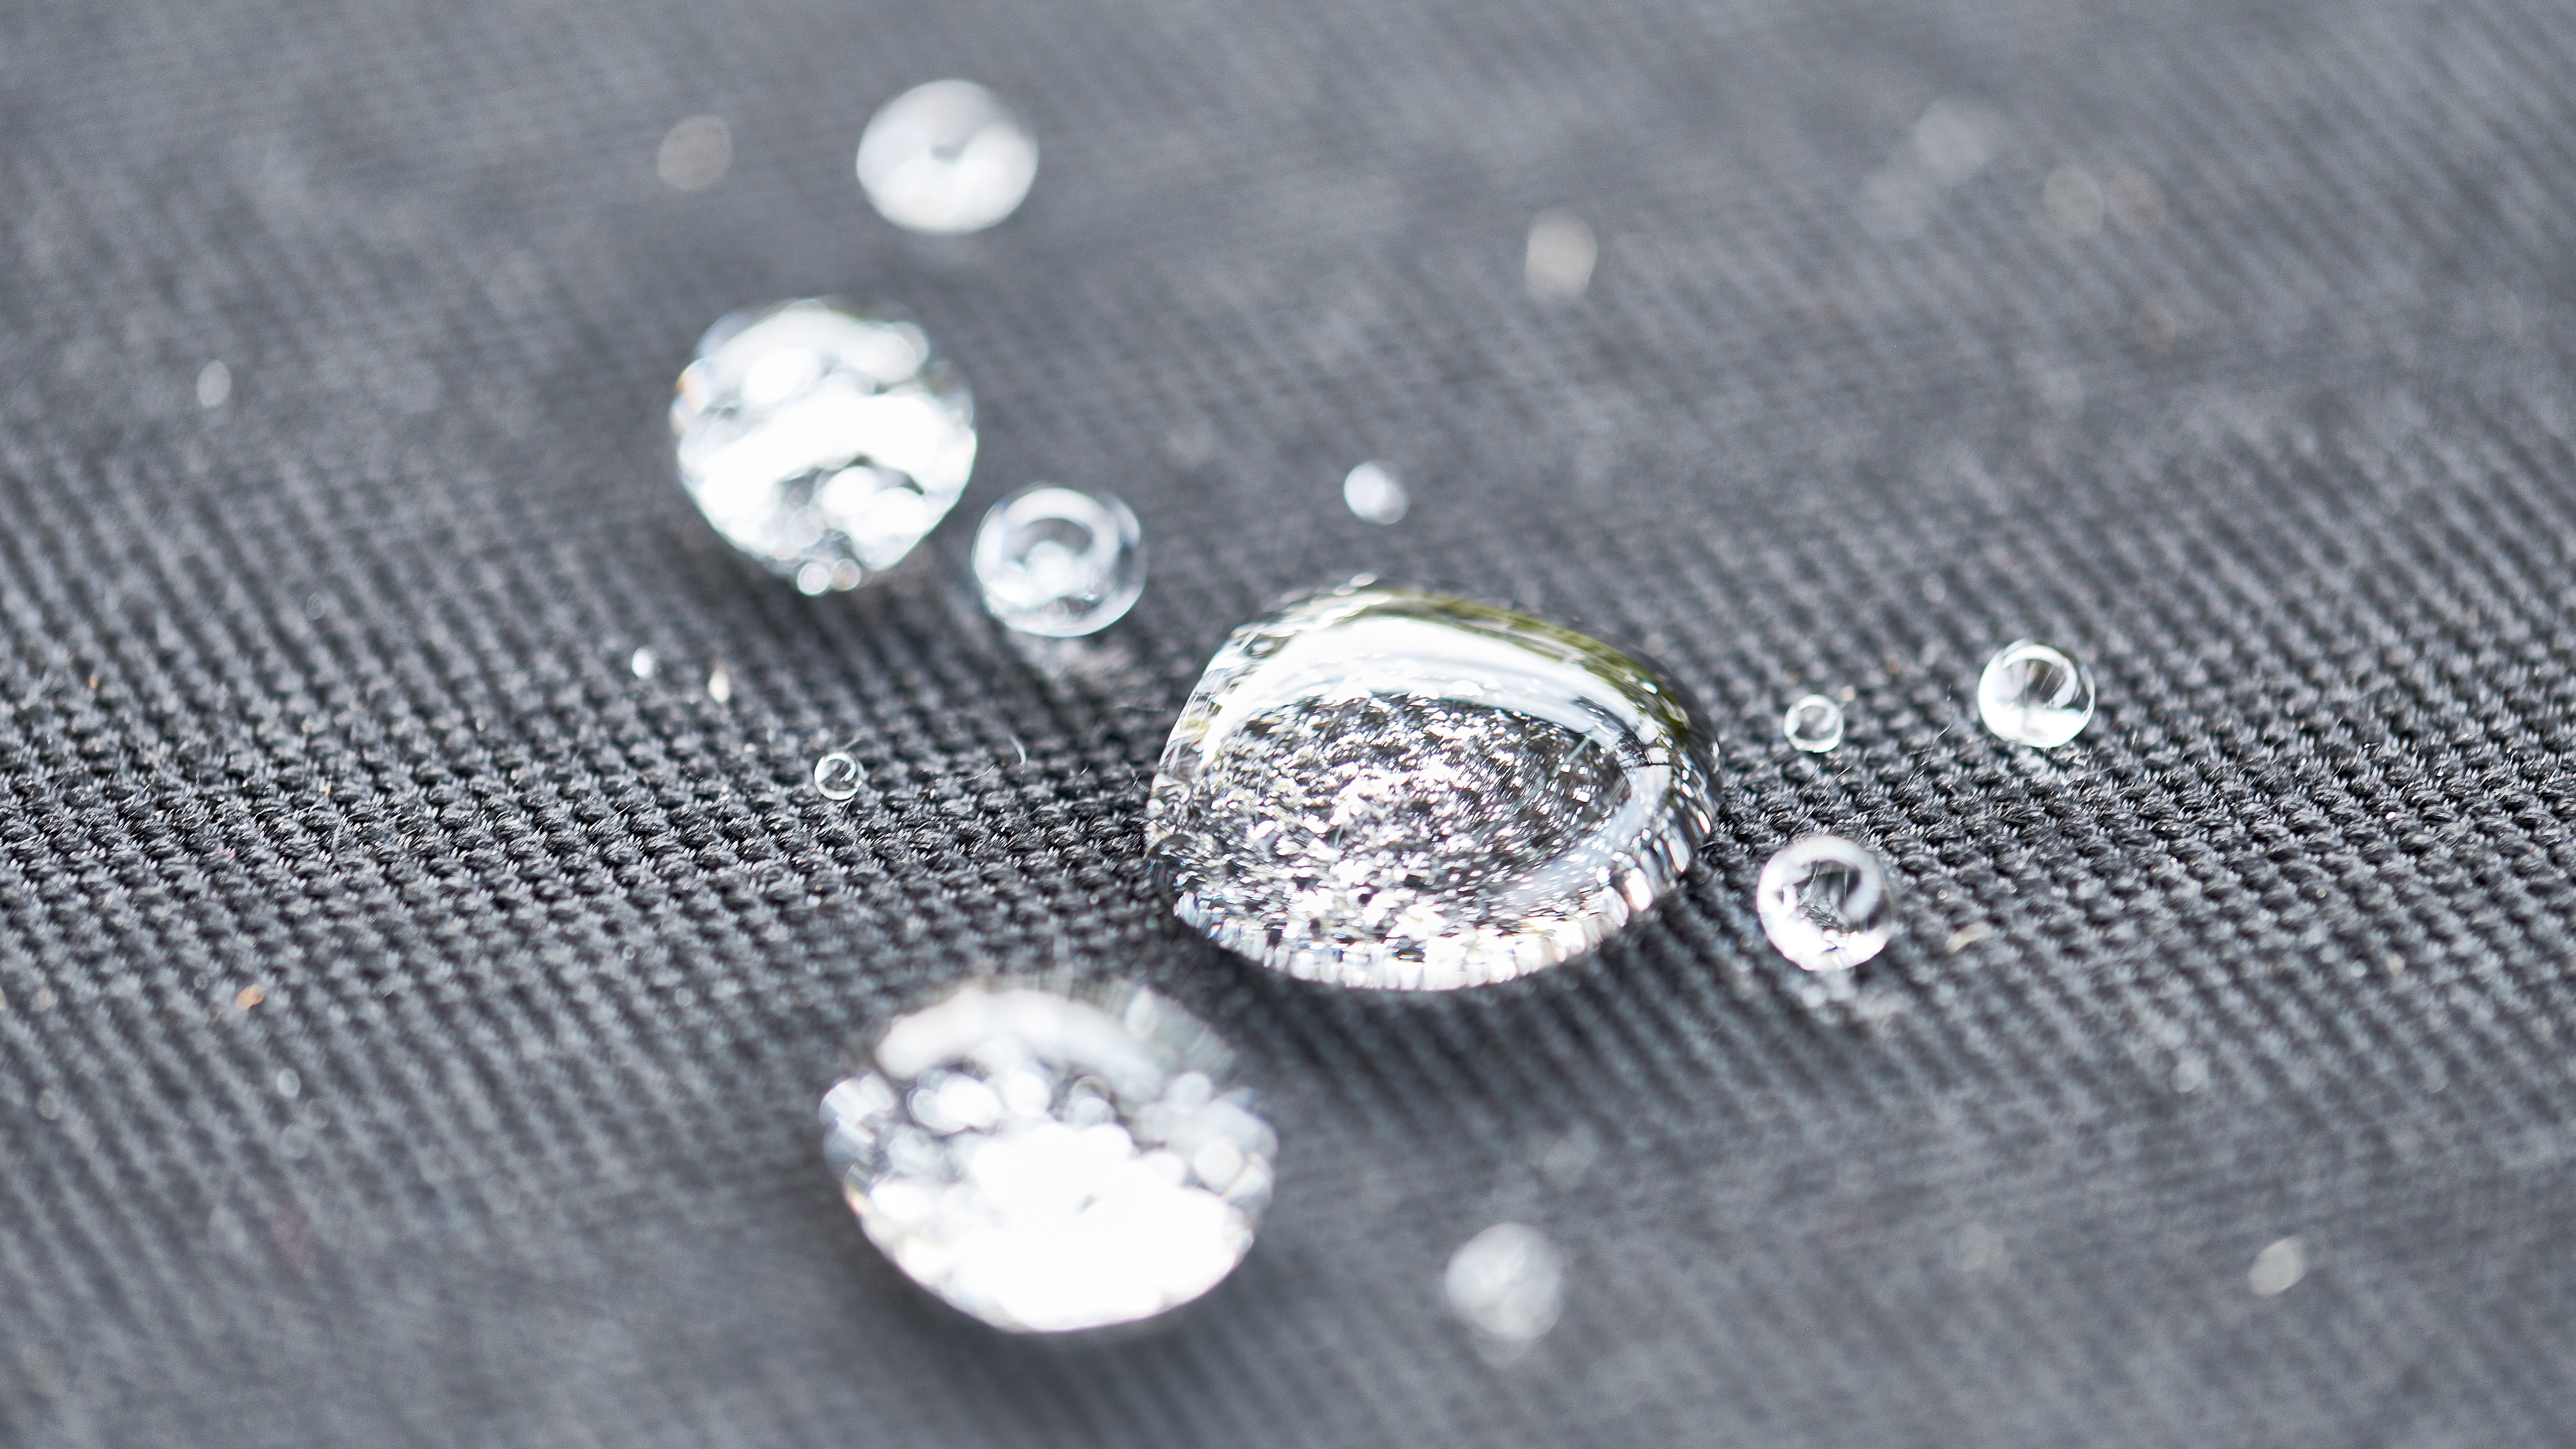 Low surface energy showing water droplets beading on a waterproof textile surface